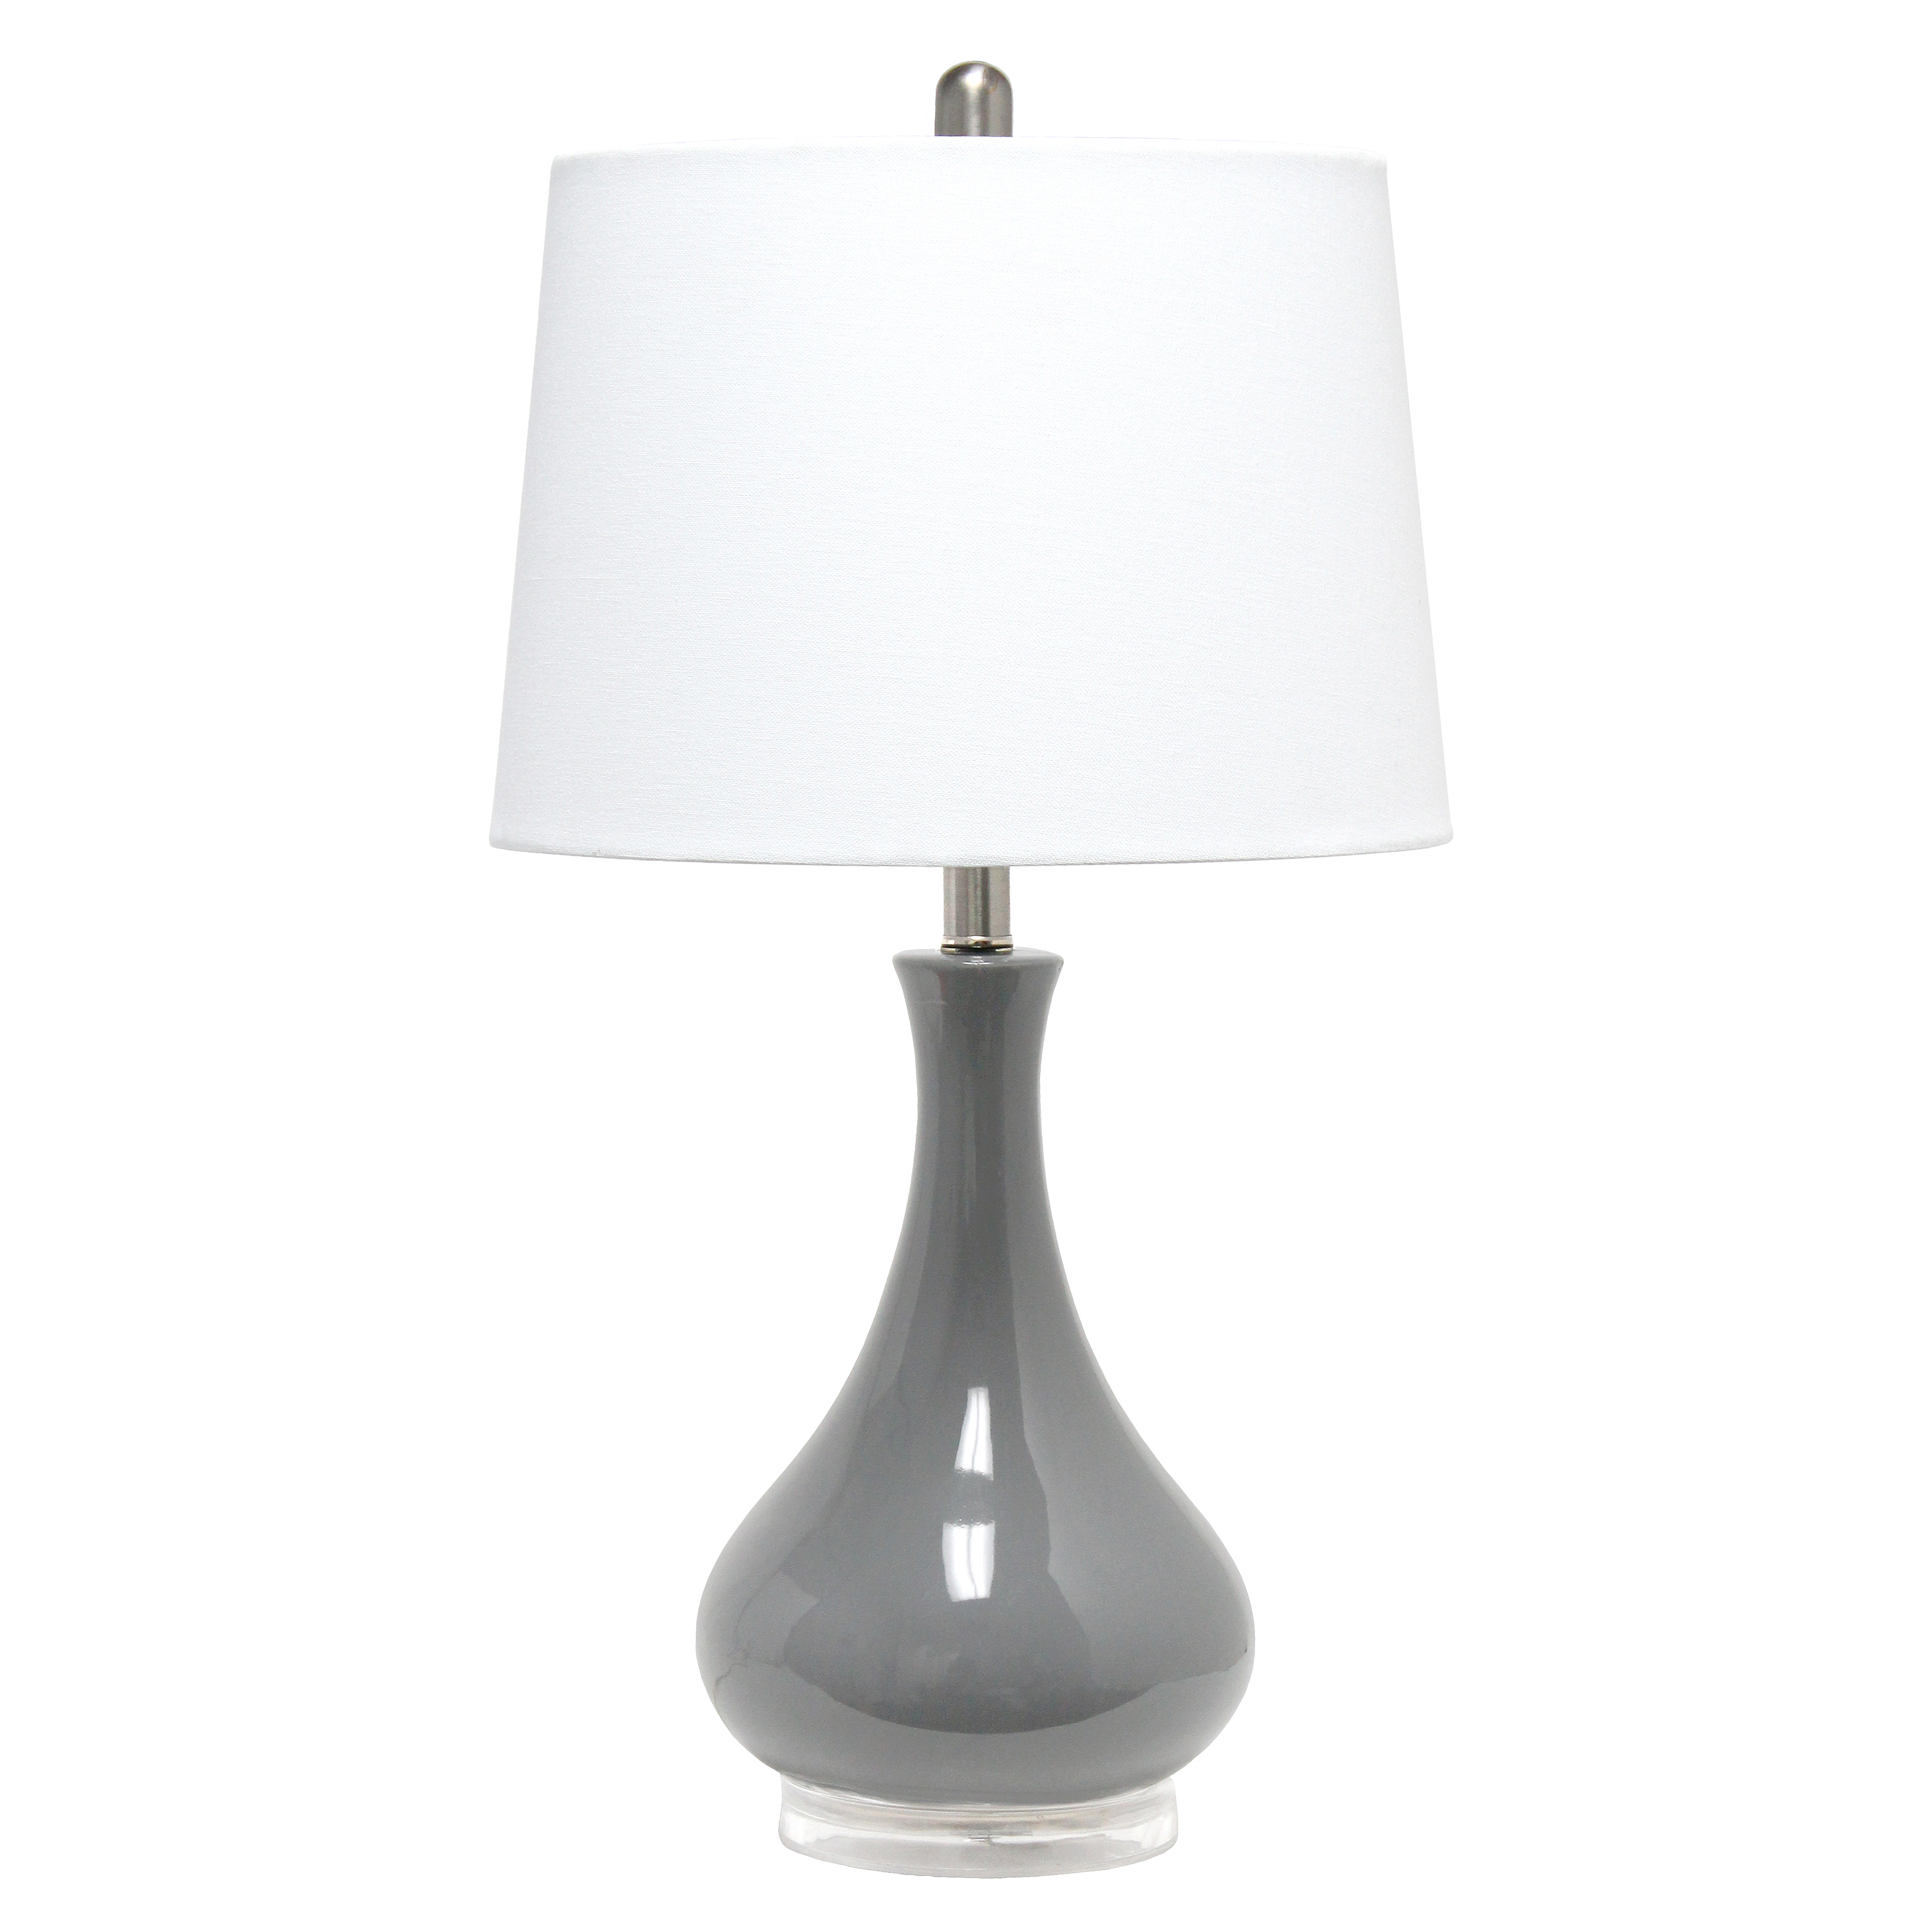 Lalia Home Droplet Table Lamp with Fabric Shade, Gray